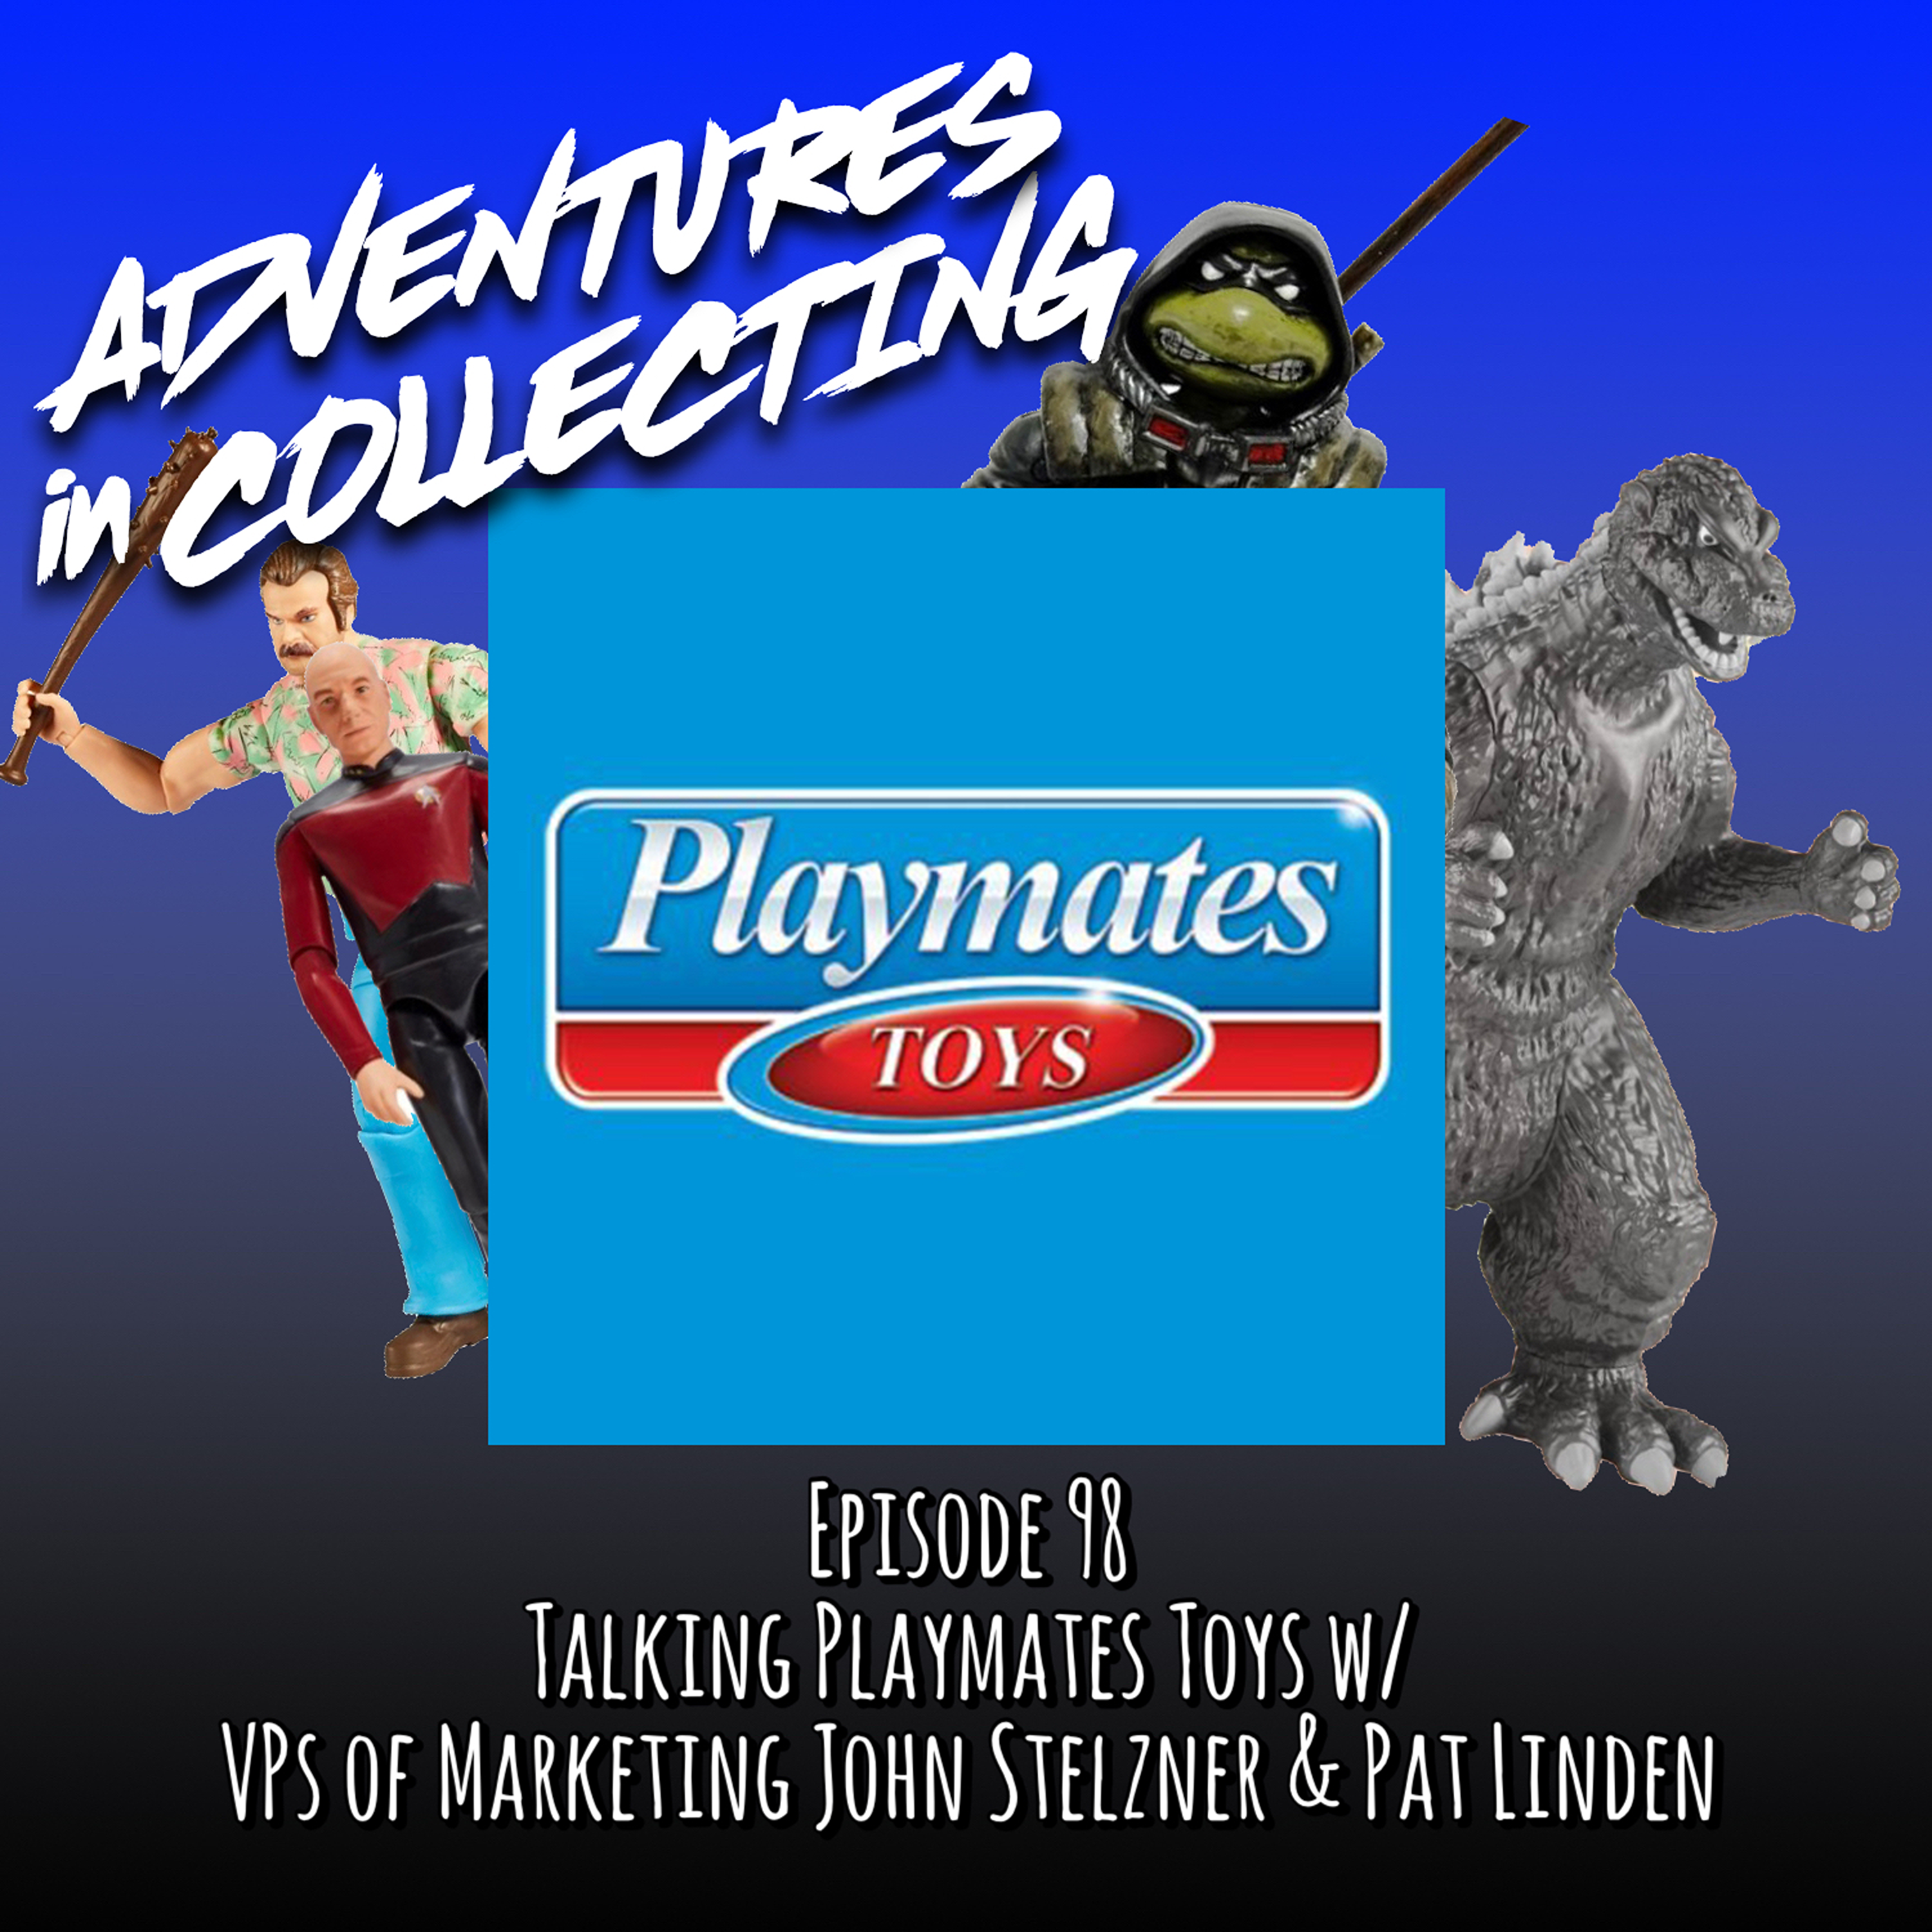 Talking Playmates Toys with Their VPs of Marketing John Stelzner and Pat Linden